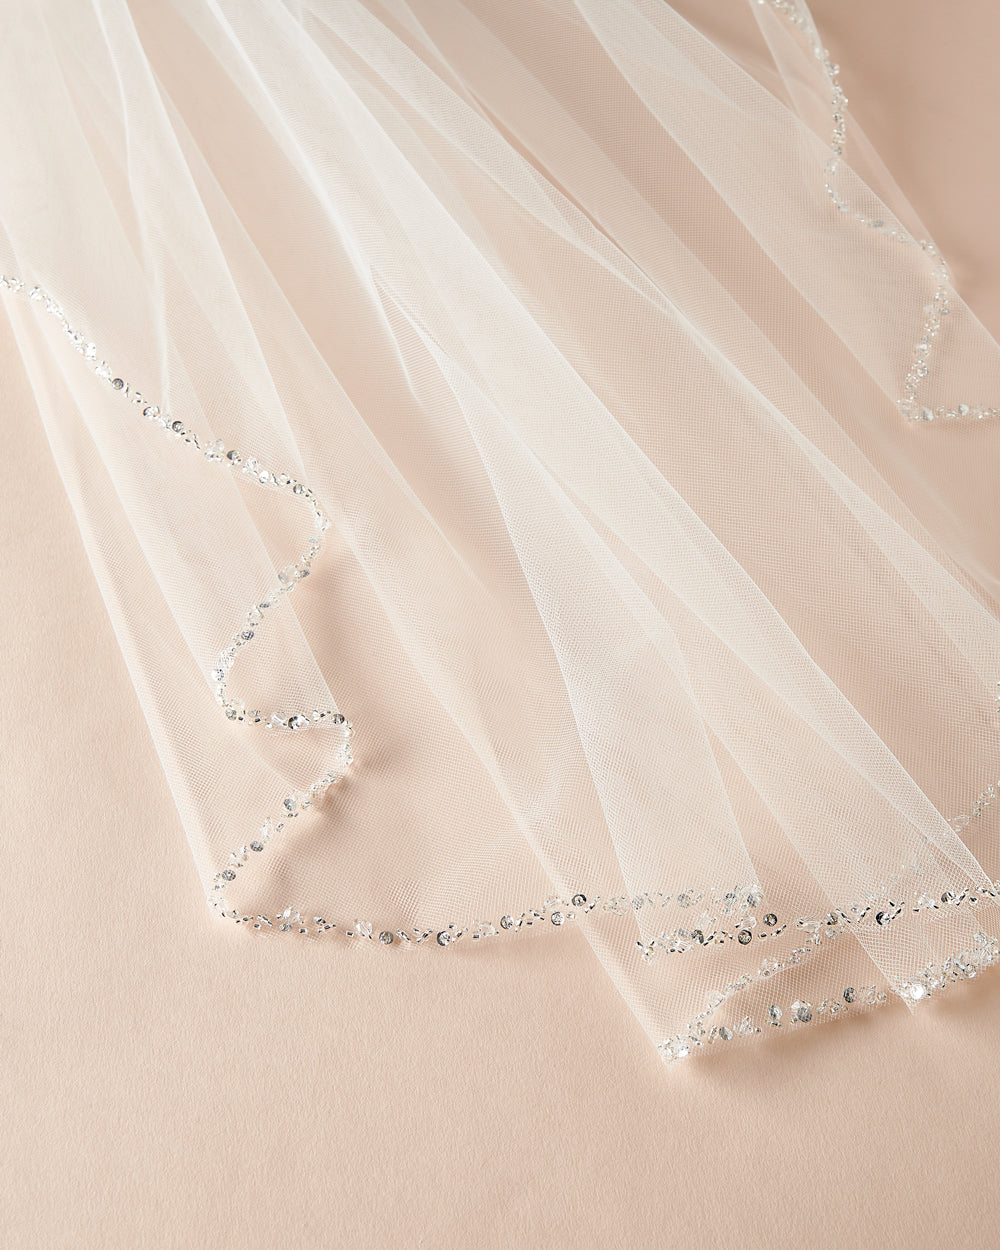 Julia' cathedral bridal veil with pearls – Bridal Caprice Boutique